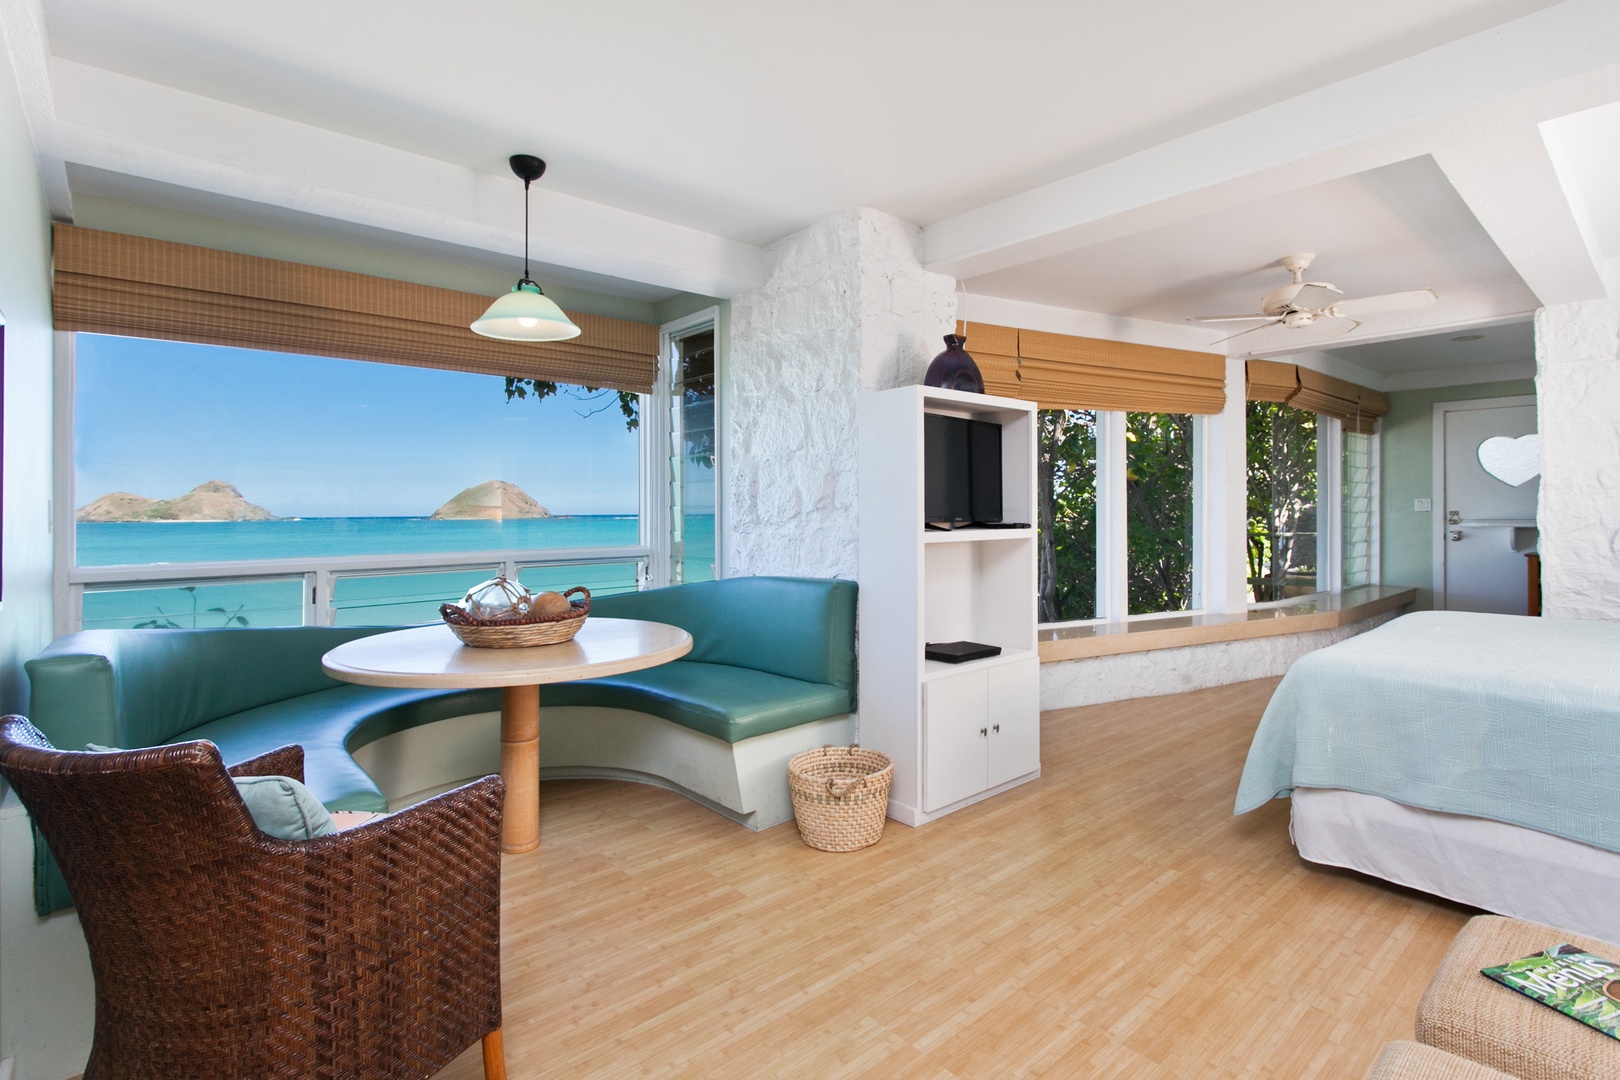 Kailua Vacation Rentals, Hale Kainalu* - Cozy primary suite breakfast nook with a built-in bench and stunning ocean views for a serene start to the day.